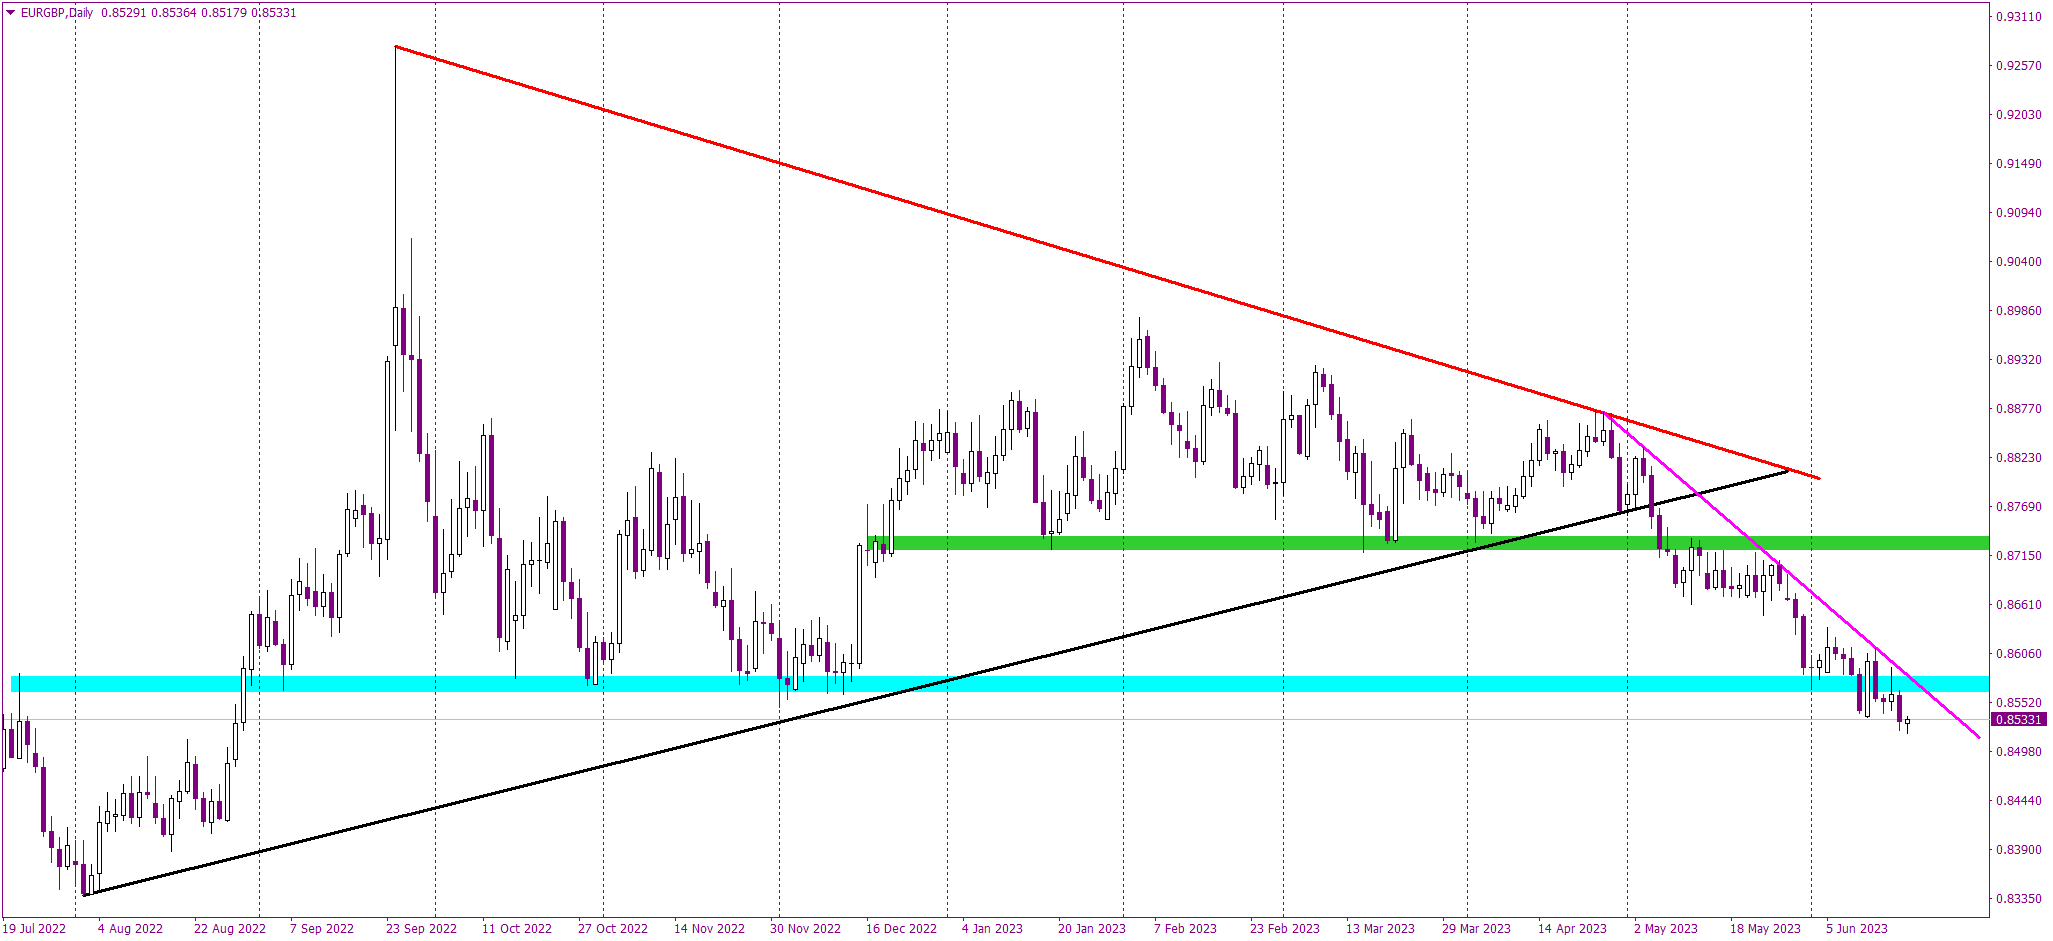 New Yearly Lows for the EURGBP